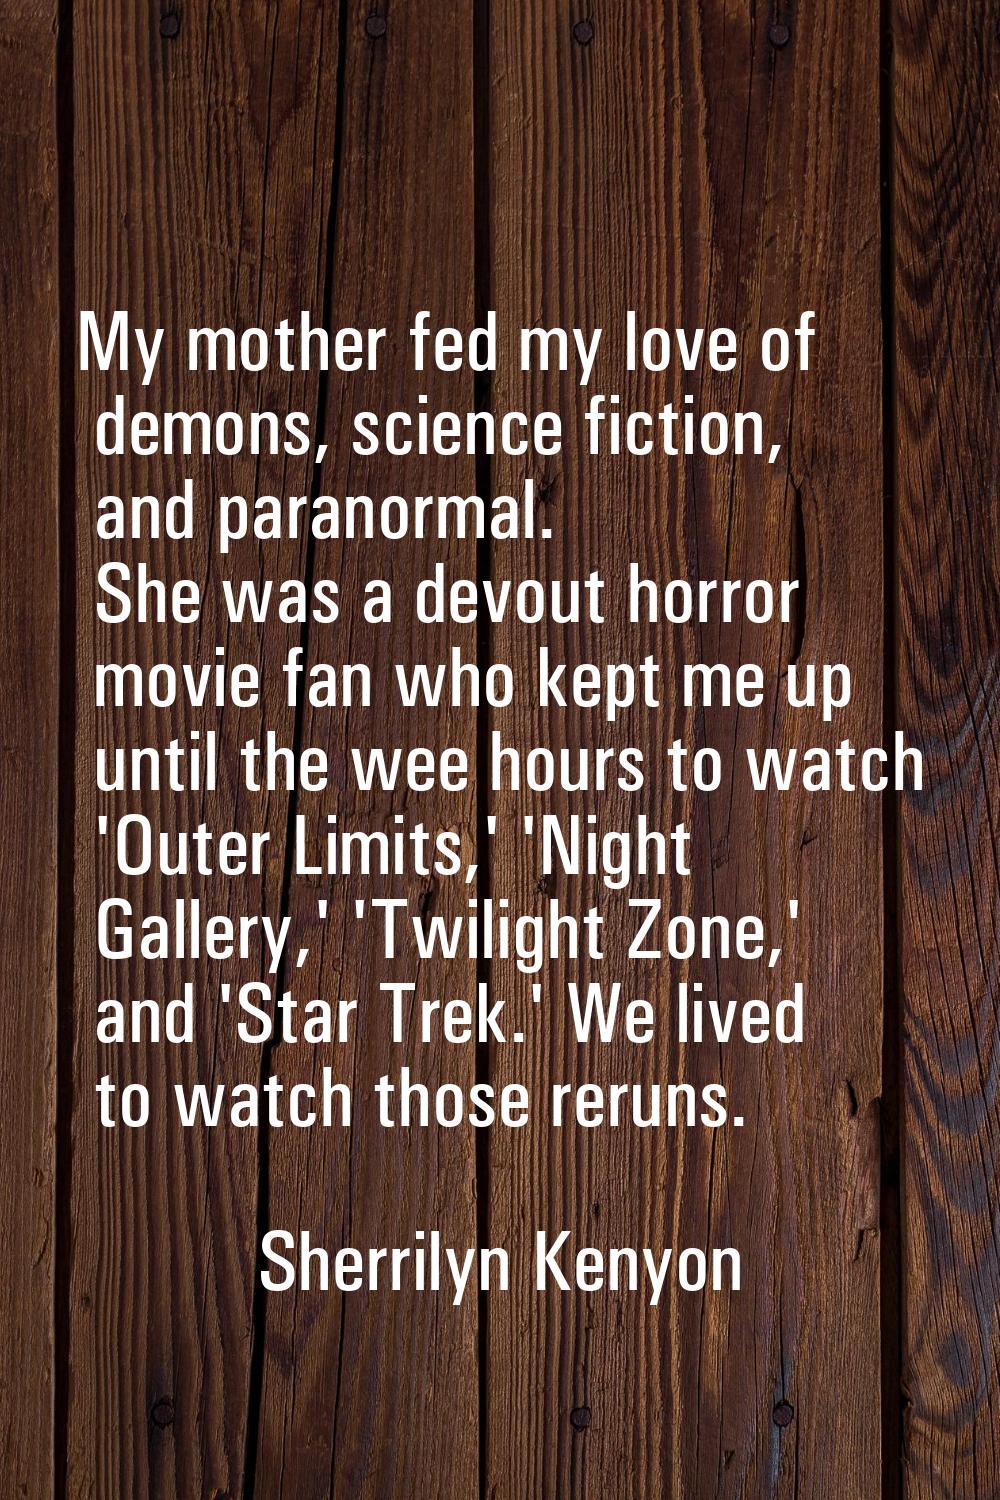 My mother fed my love of demons, science fiction, and paranormal. She was a devout horror movie fan